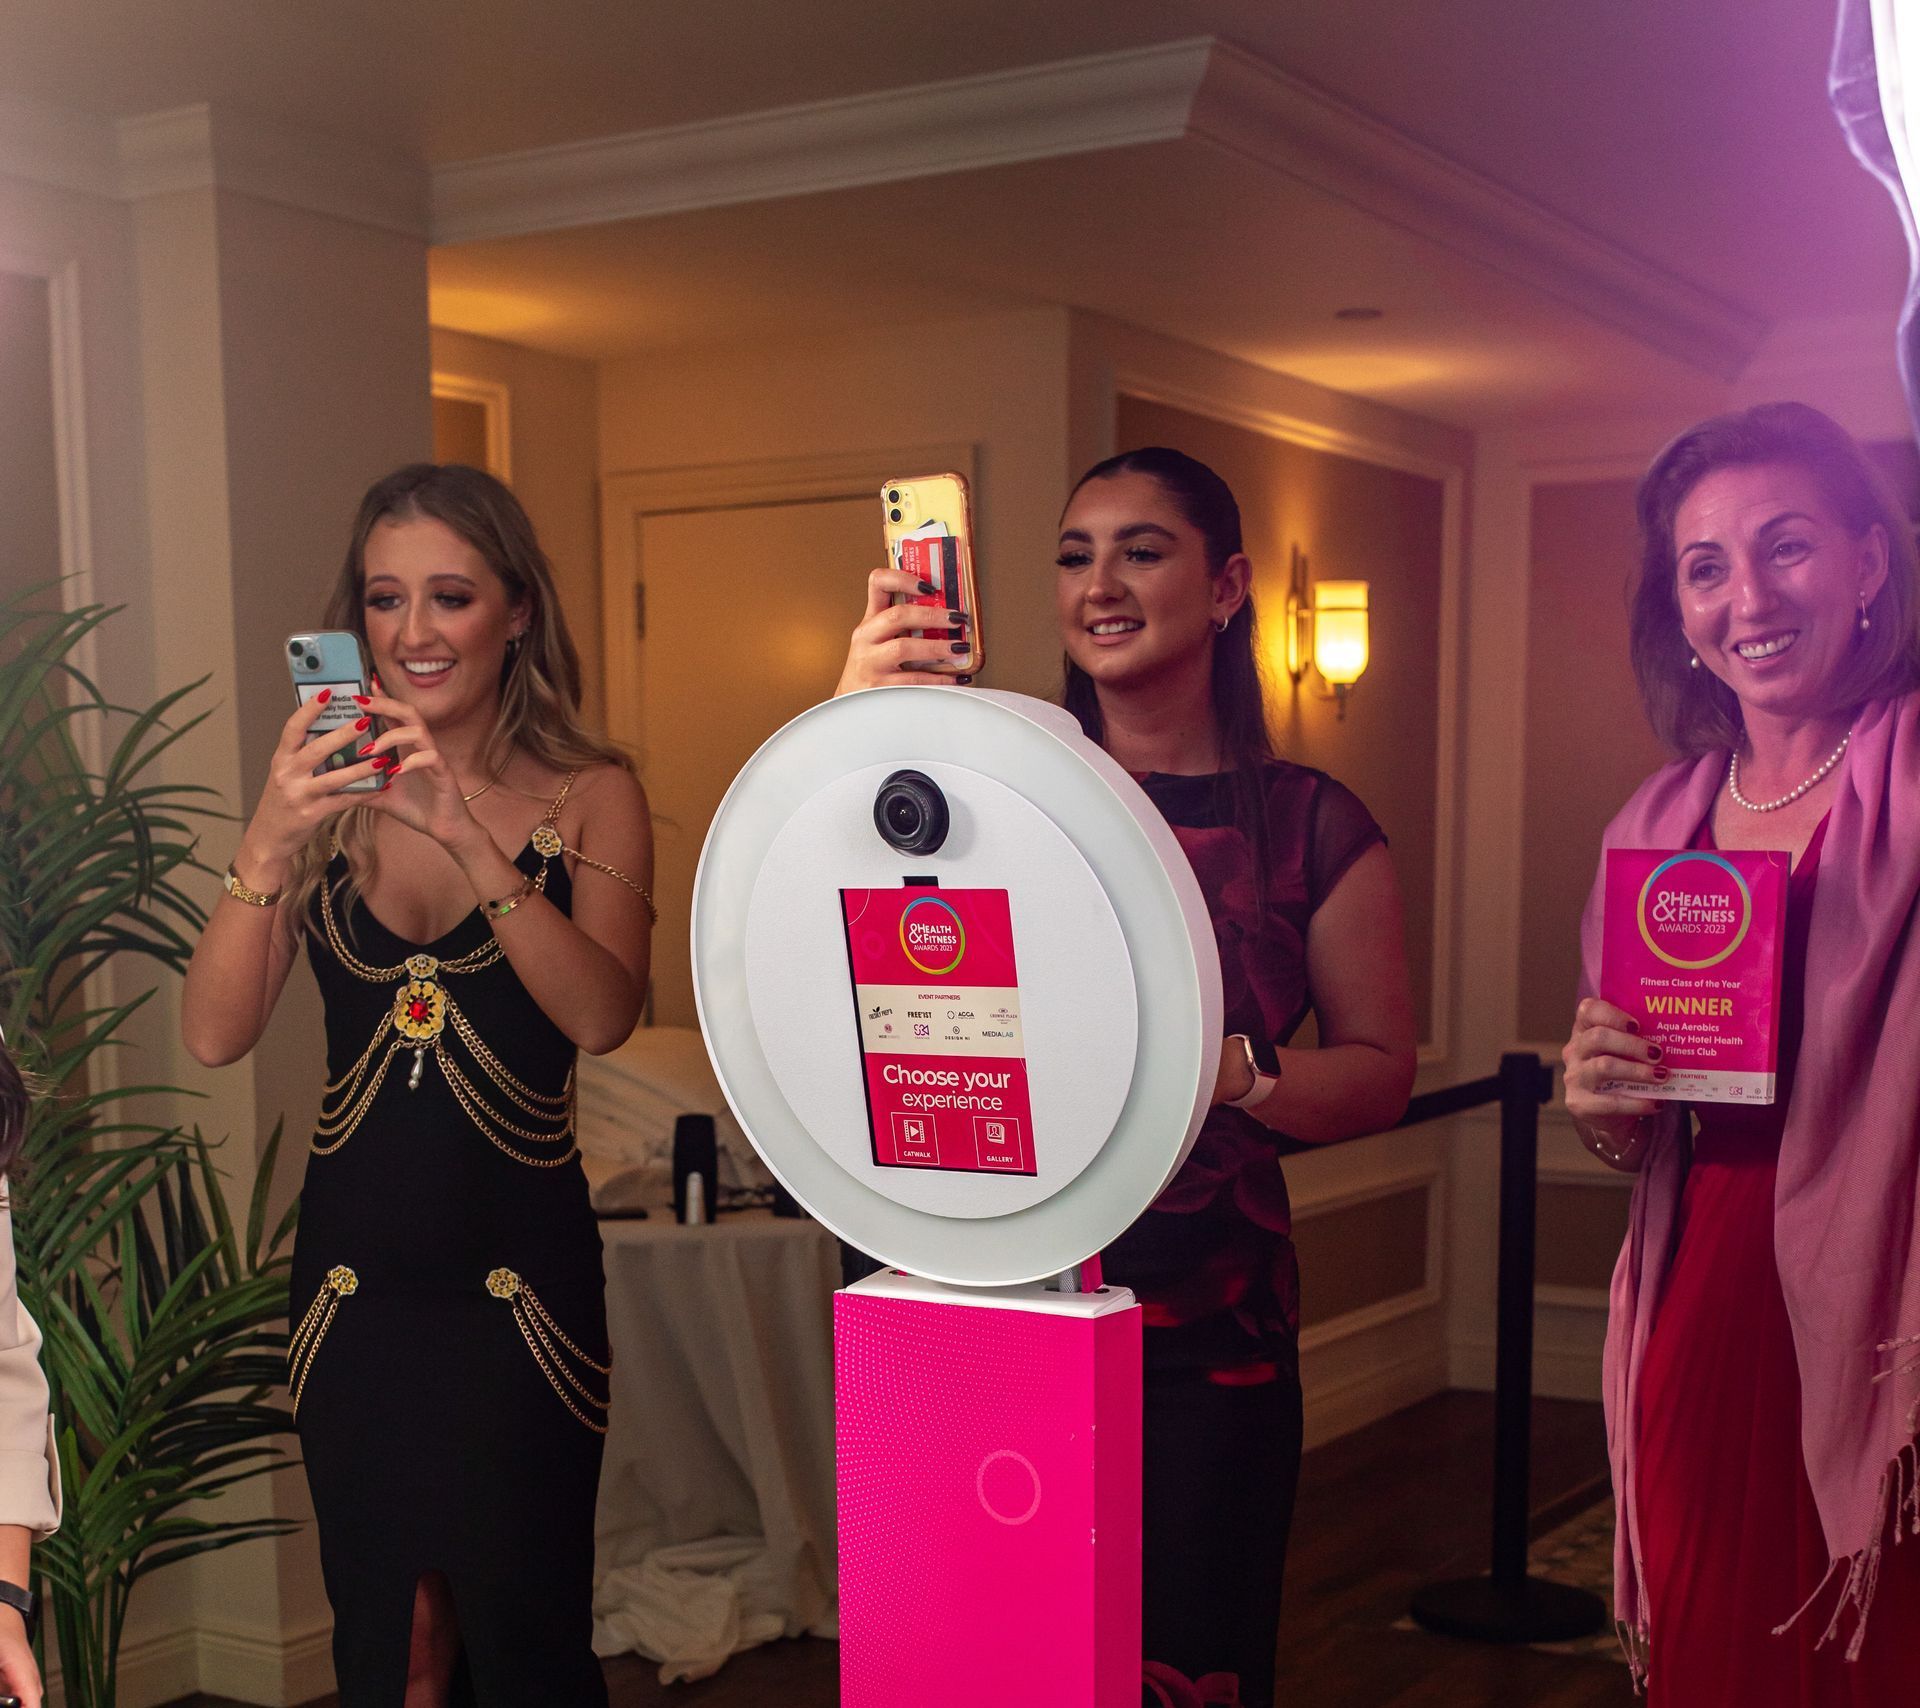 Brand Activation in Sugar Land with Flash Party Selfie Photo Booth